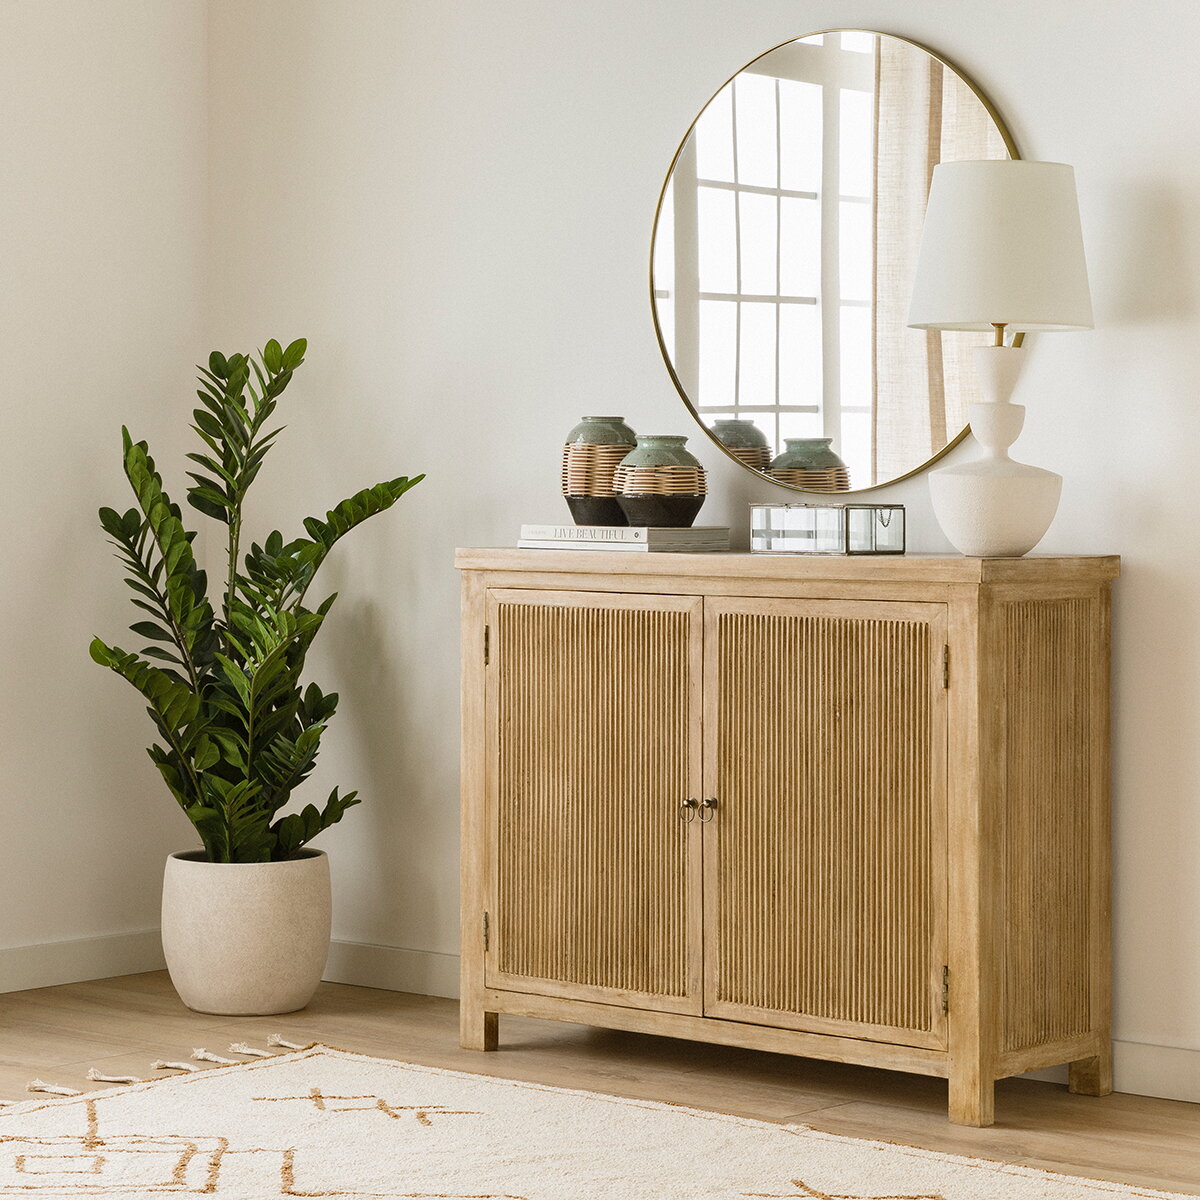 Mink console